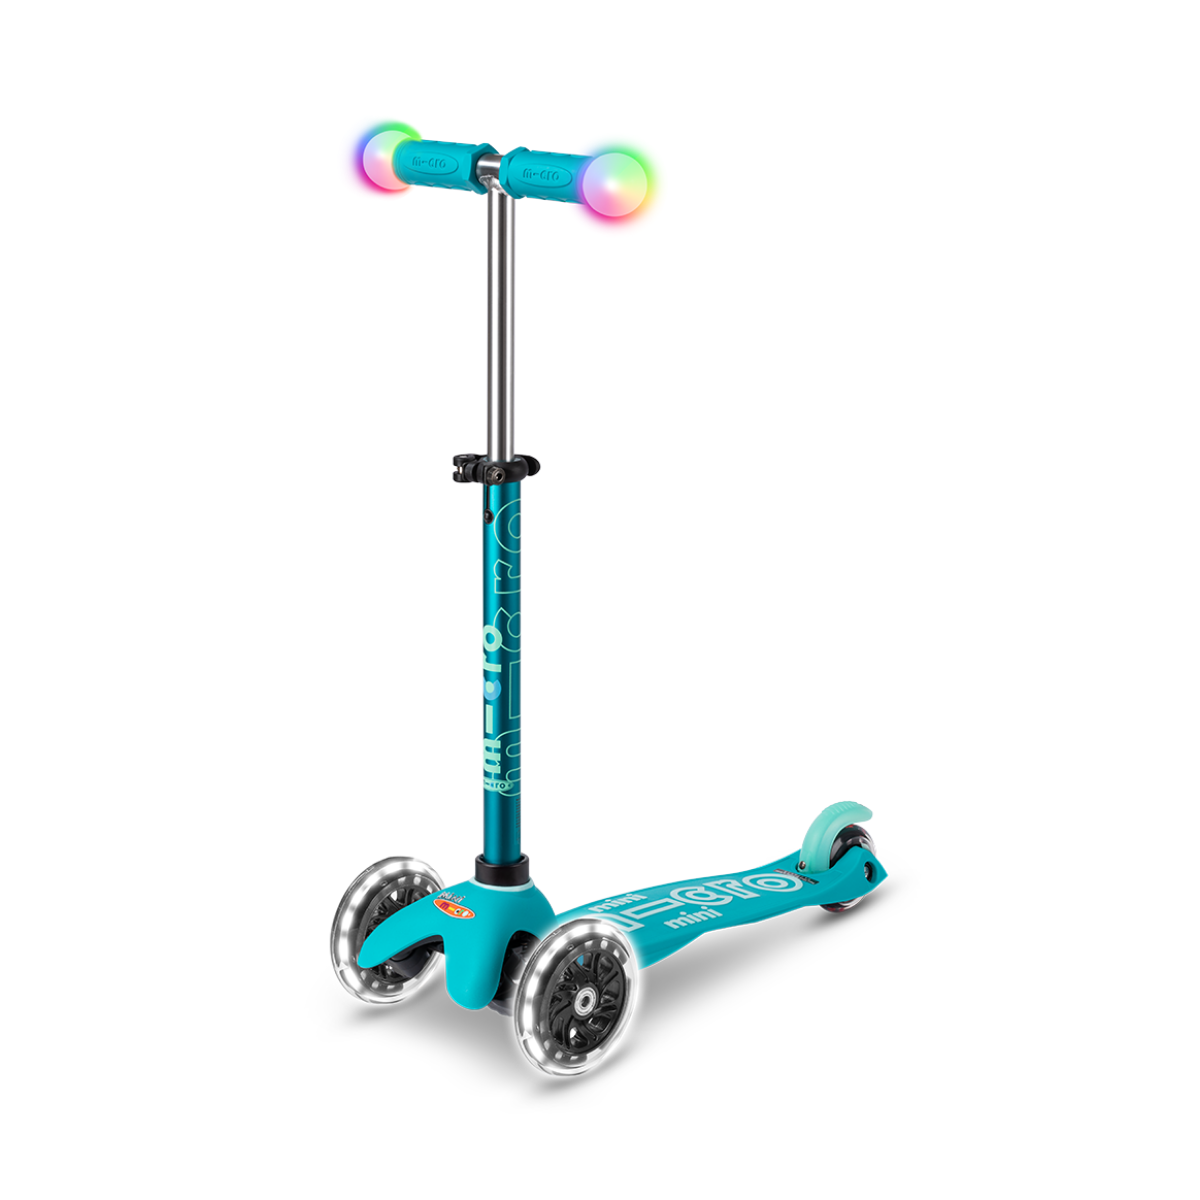 MINI DELUXE MAGIC SCOOTER (MULTIPLE COLOR OPTIONS)